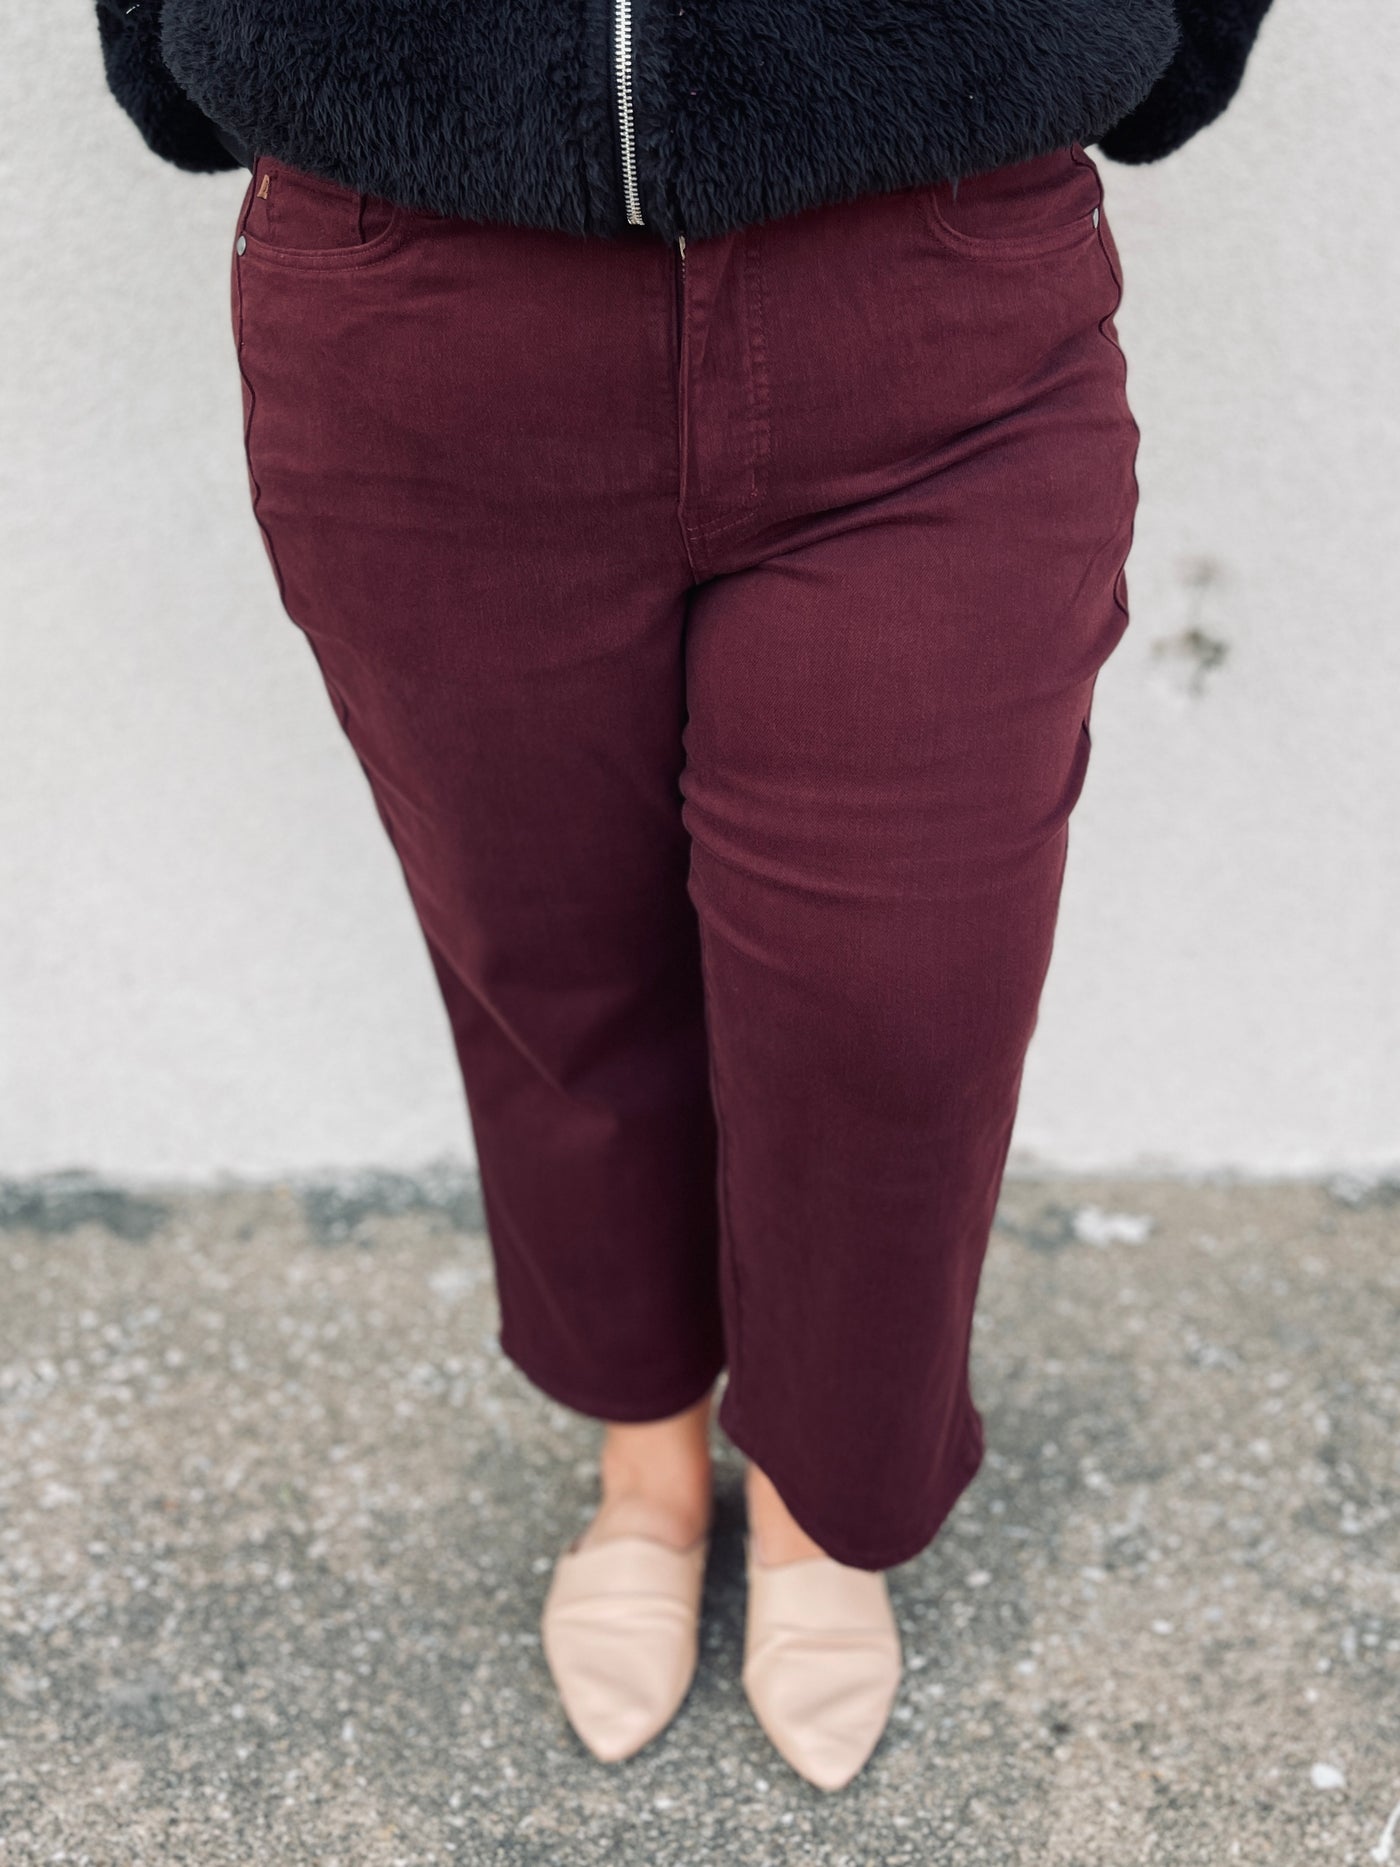 Judy Blue The Beauty Between Tummy Control Crop Jeans • Deep Red-Judy Blue-Shop Anchored Bliss Women's Boutique Clothing Store